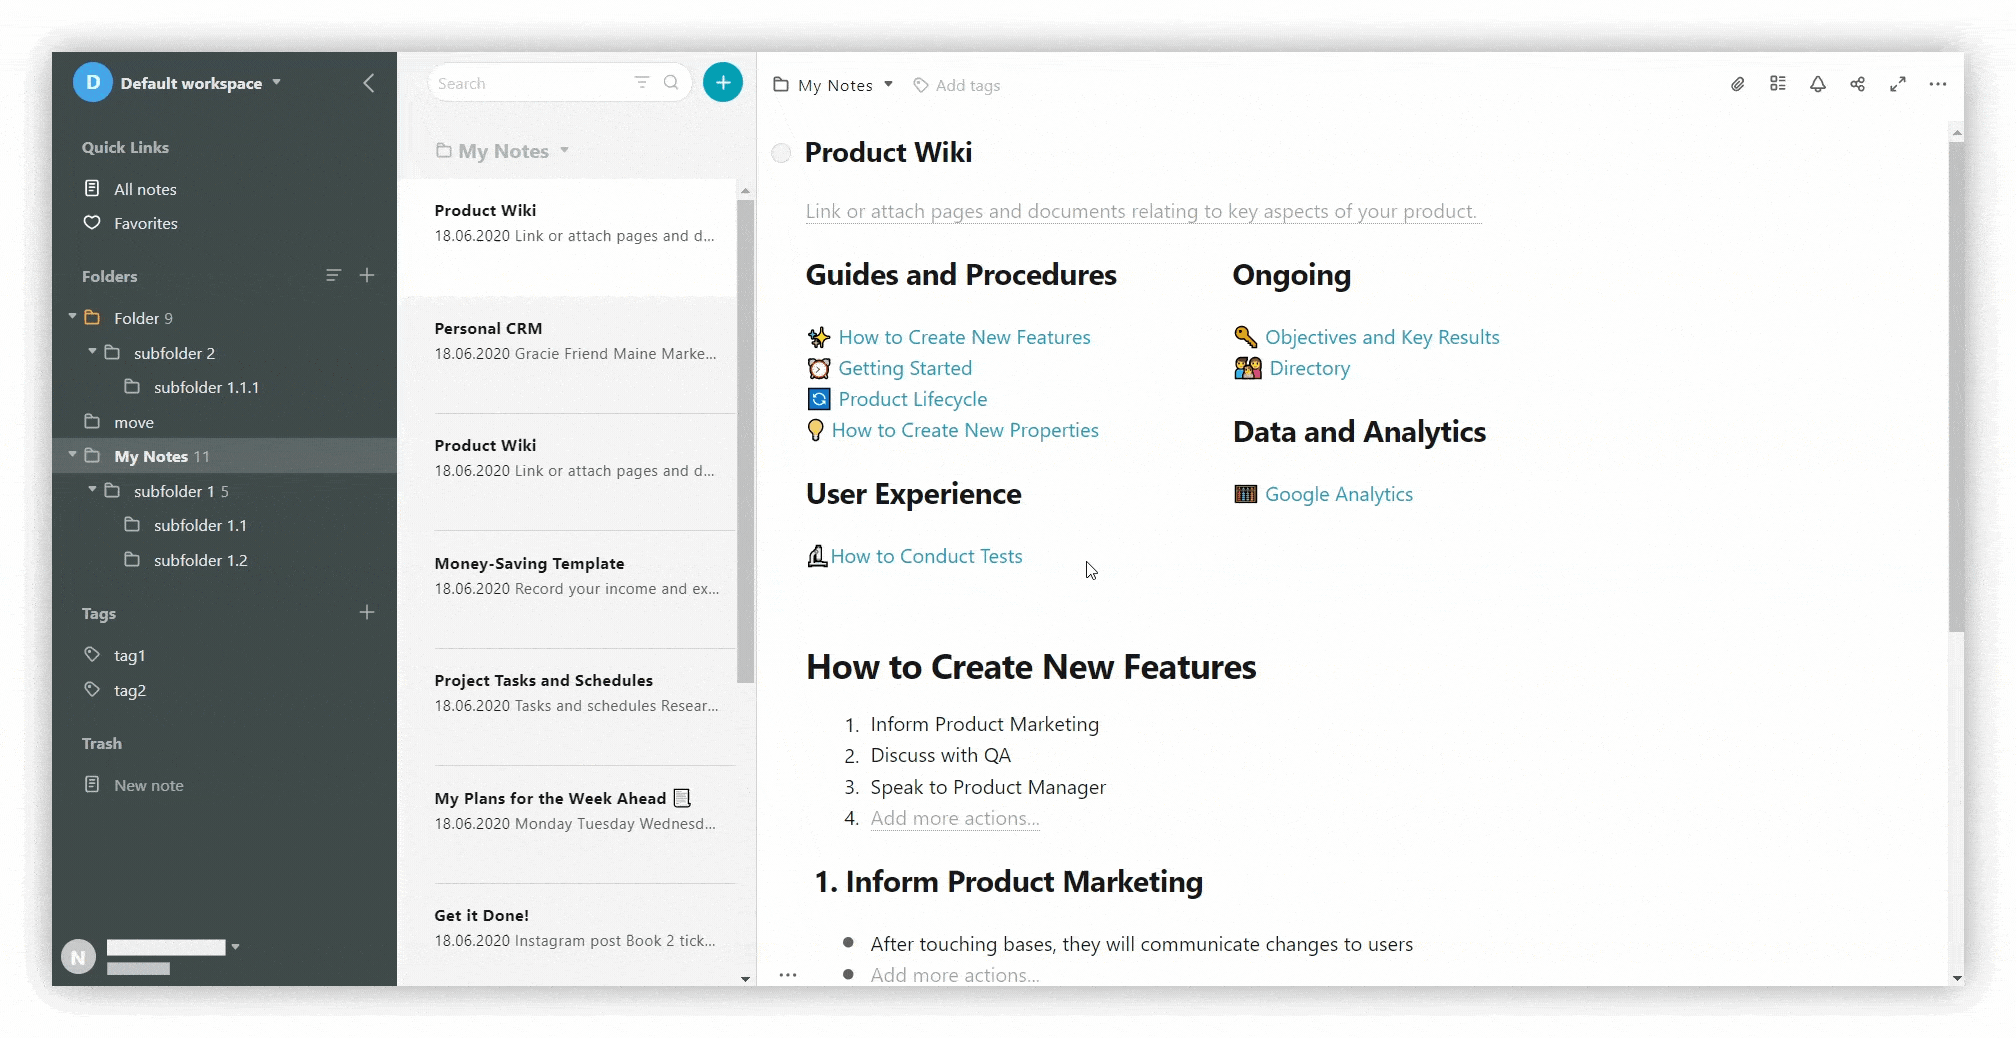 Collapse folders, move pages & folders, and change tags